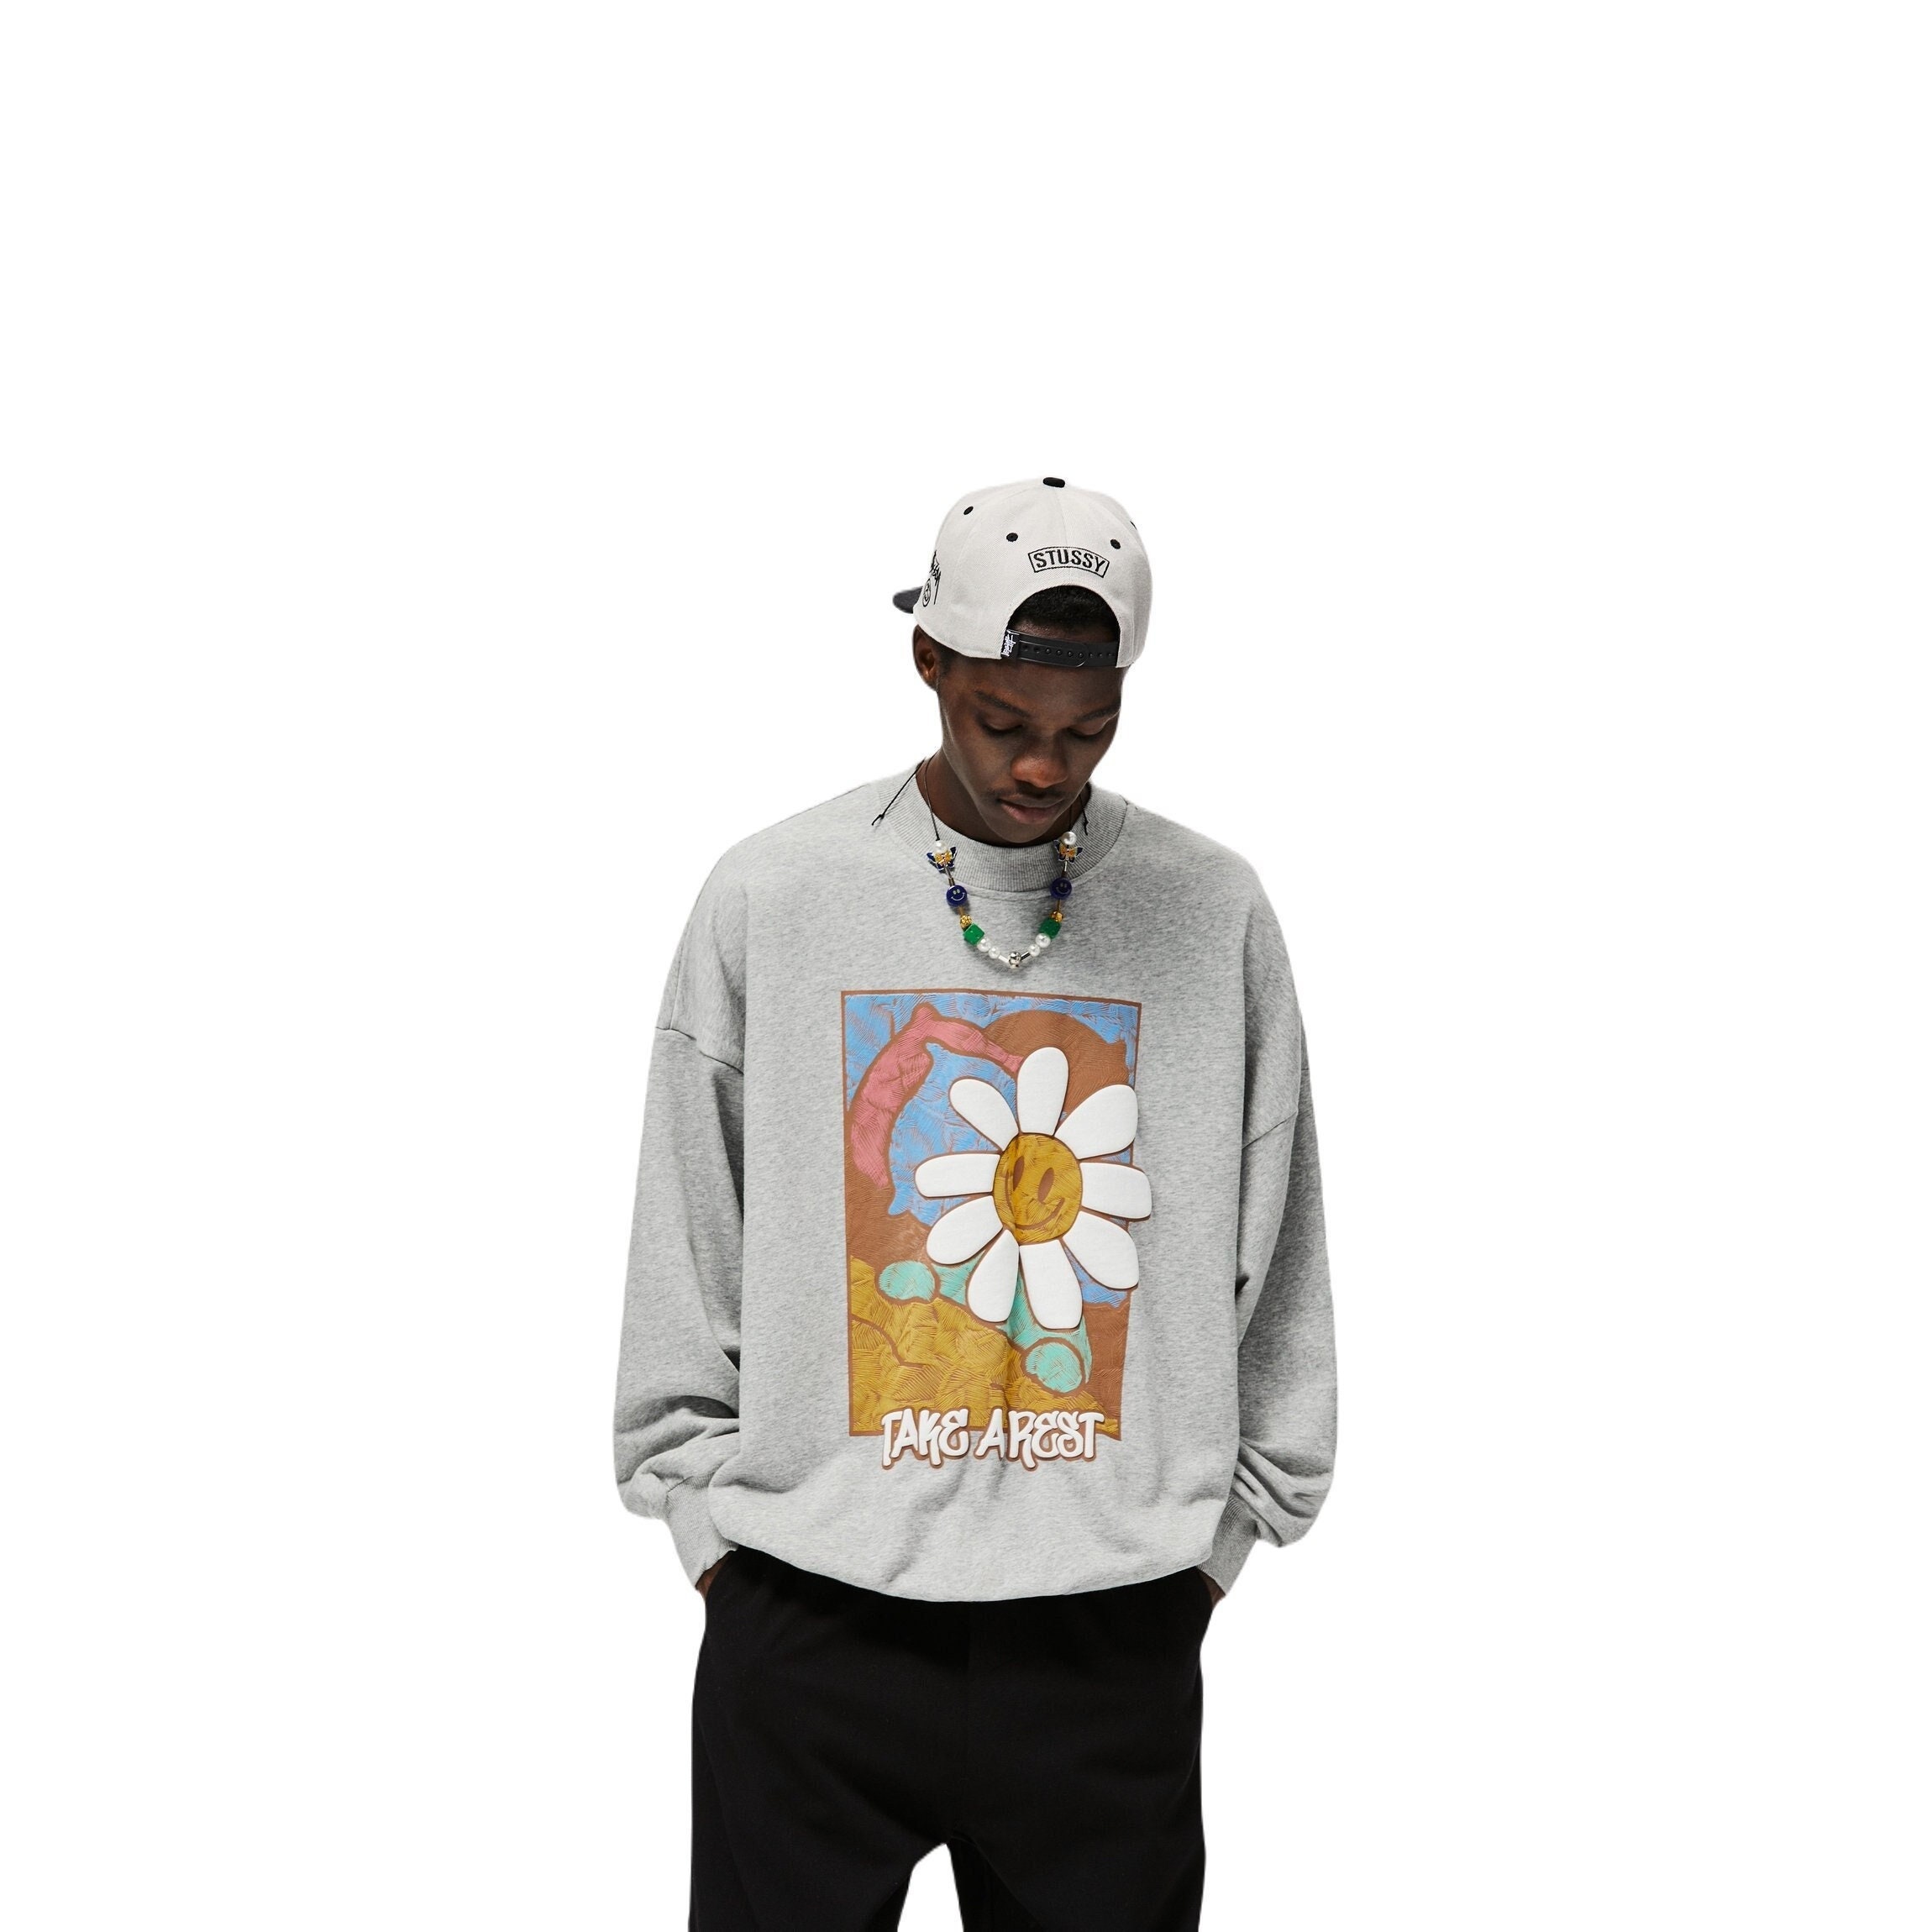 Streetwear Fashion Oil Painting Smiley Daisy Printed Sweatshirt For Men Urban Long Sleeve Cotton Take Artist Graphic Pullover